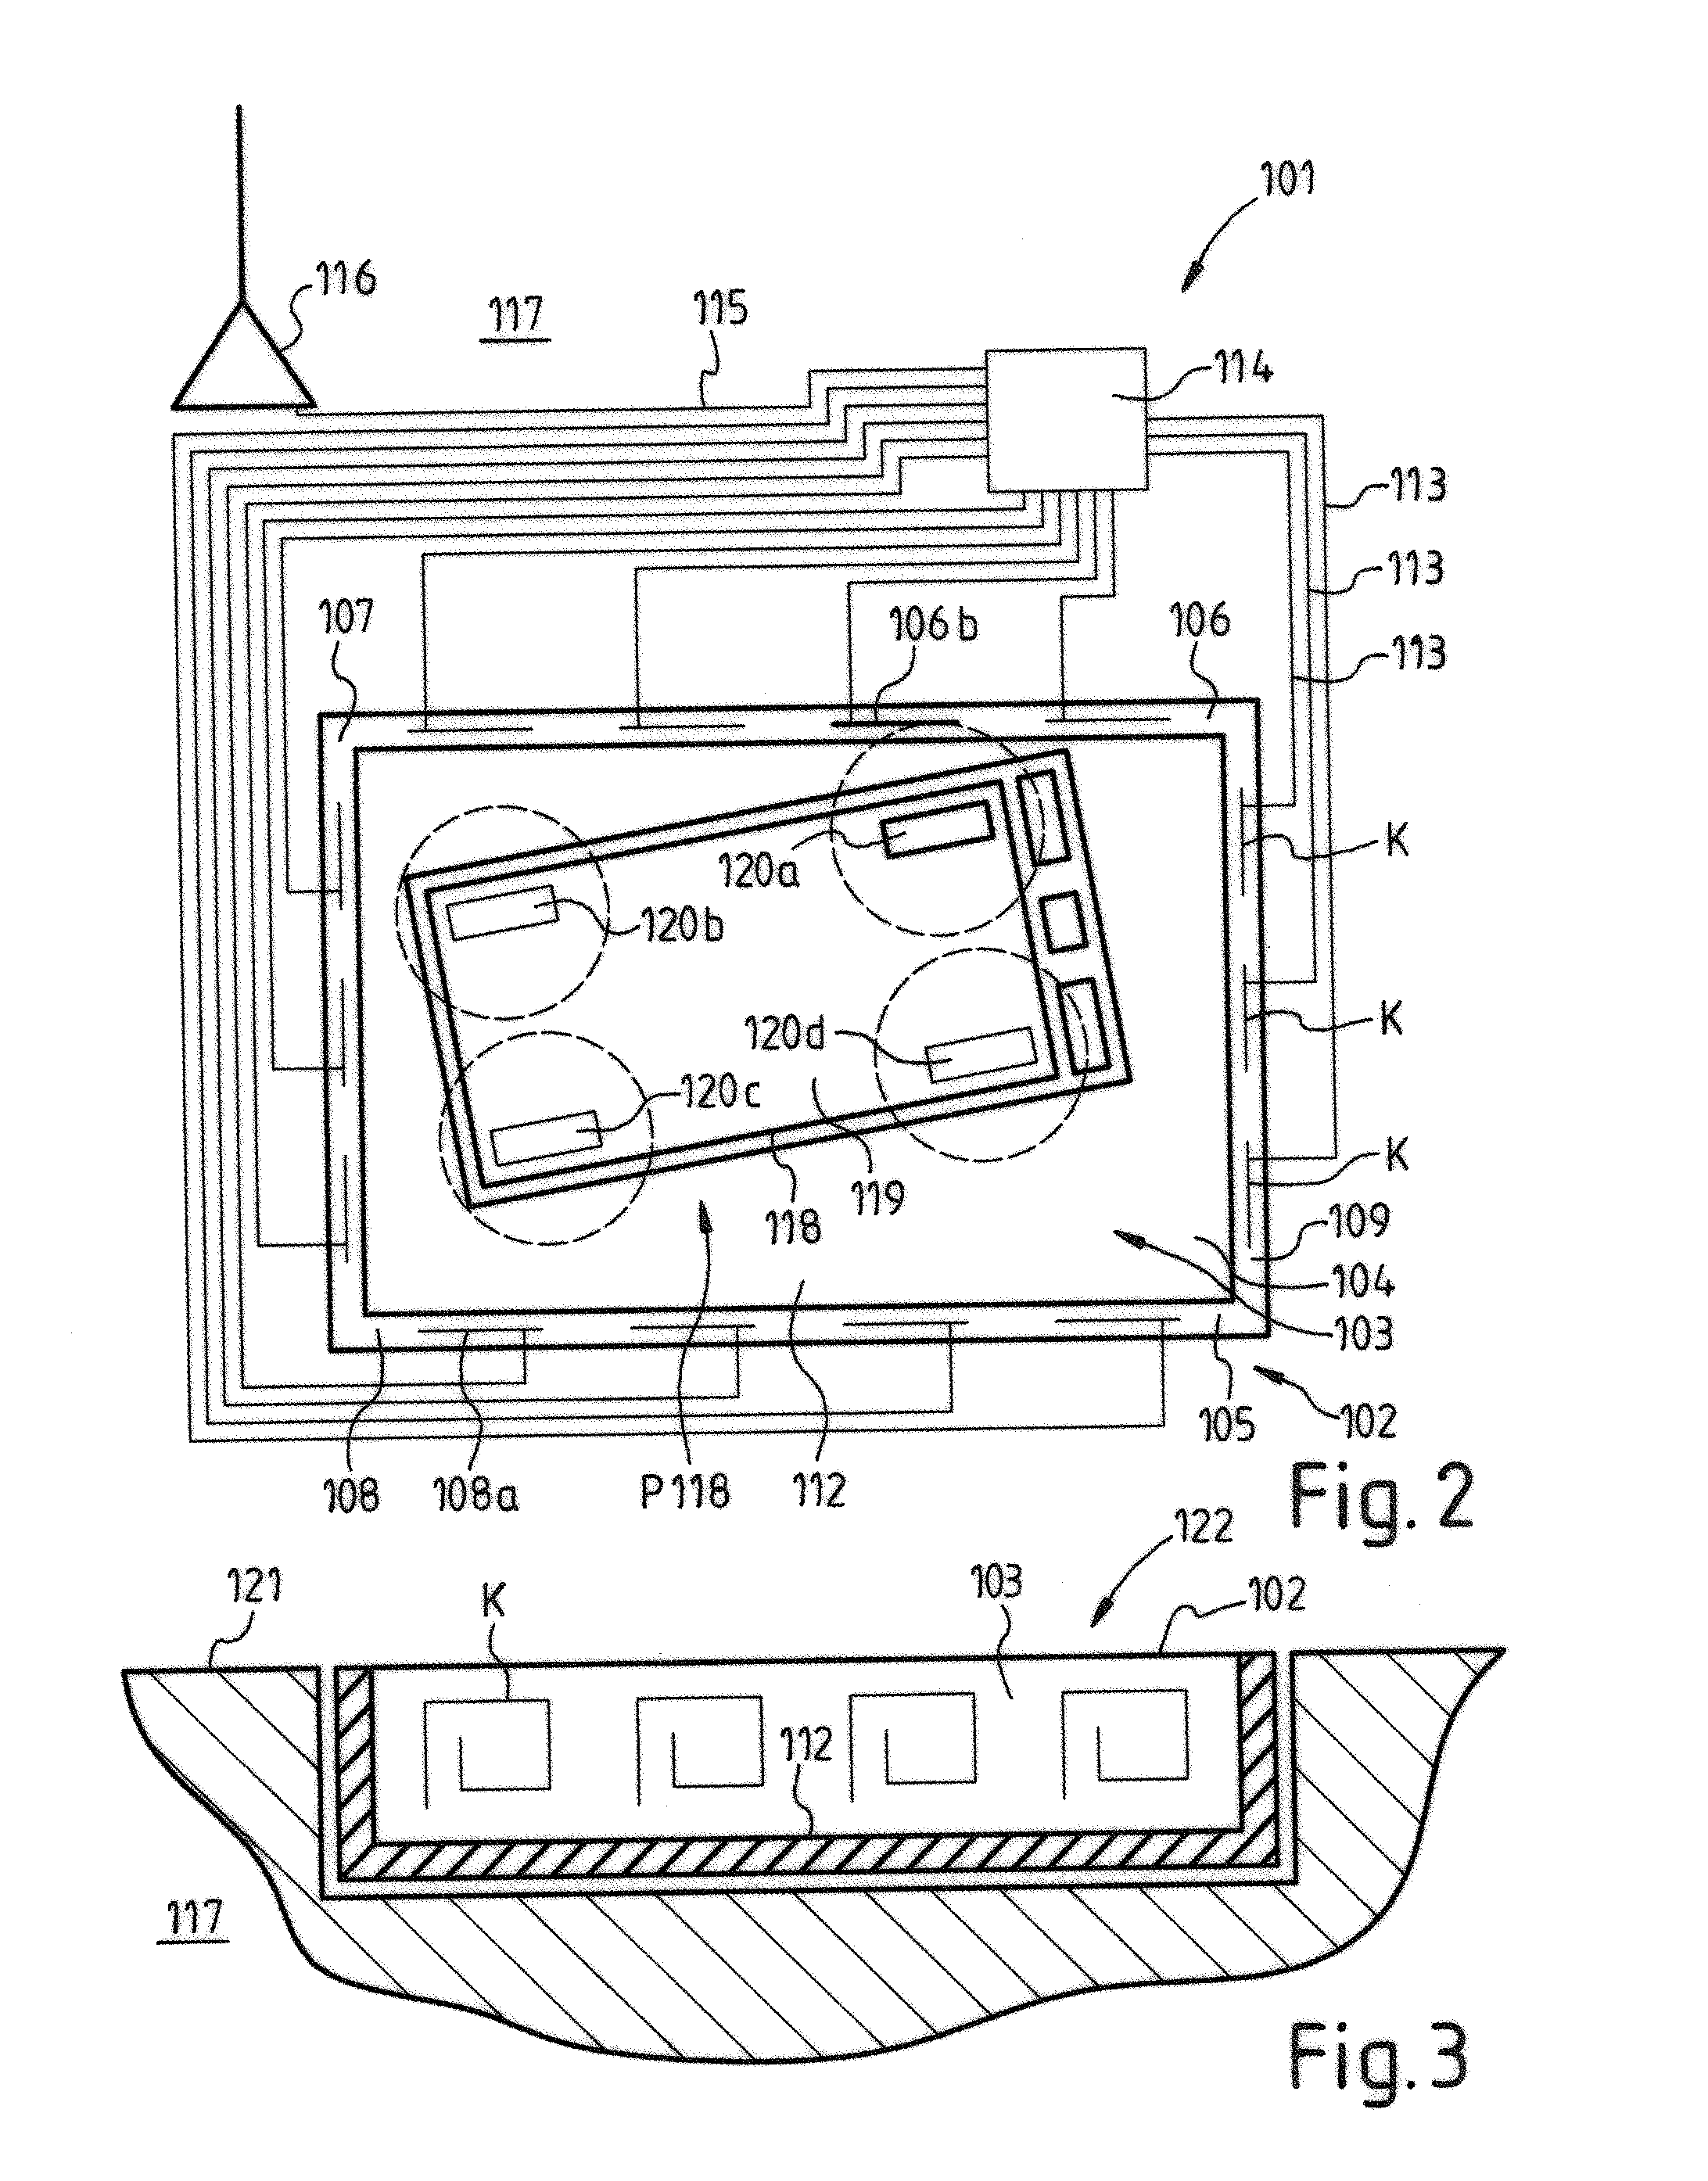 Integration device and method of manufacturing a shell for a cradle